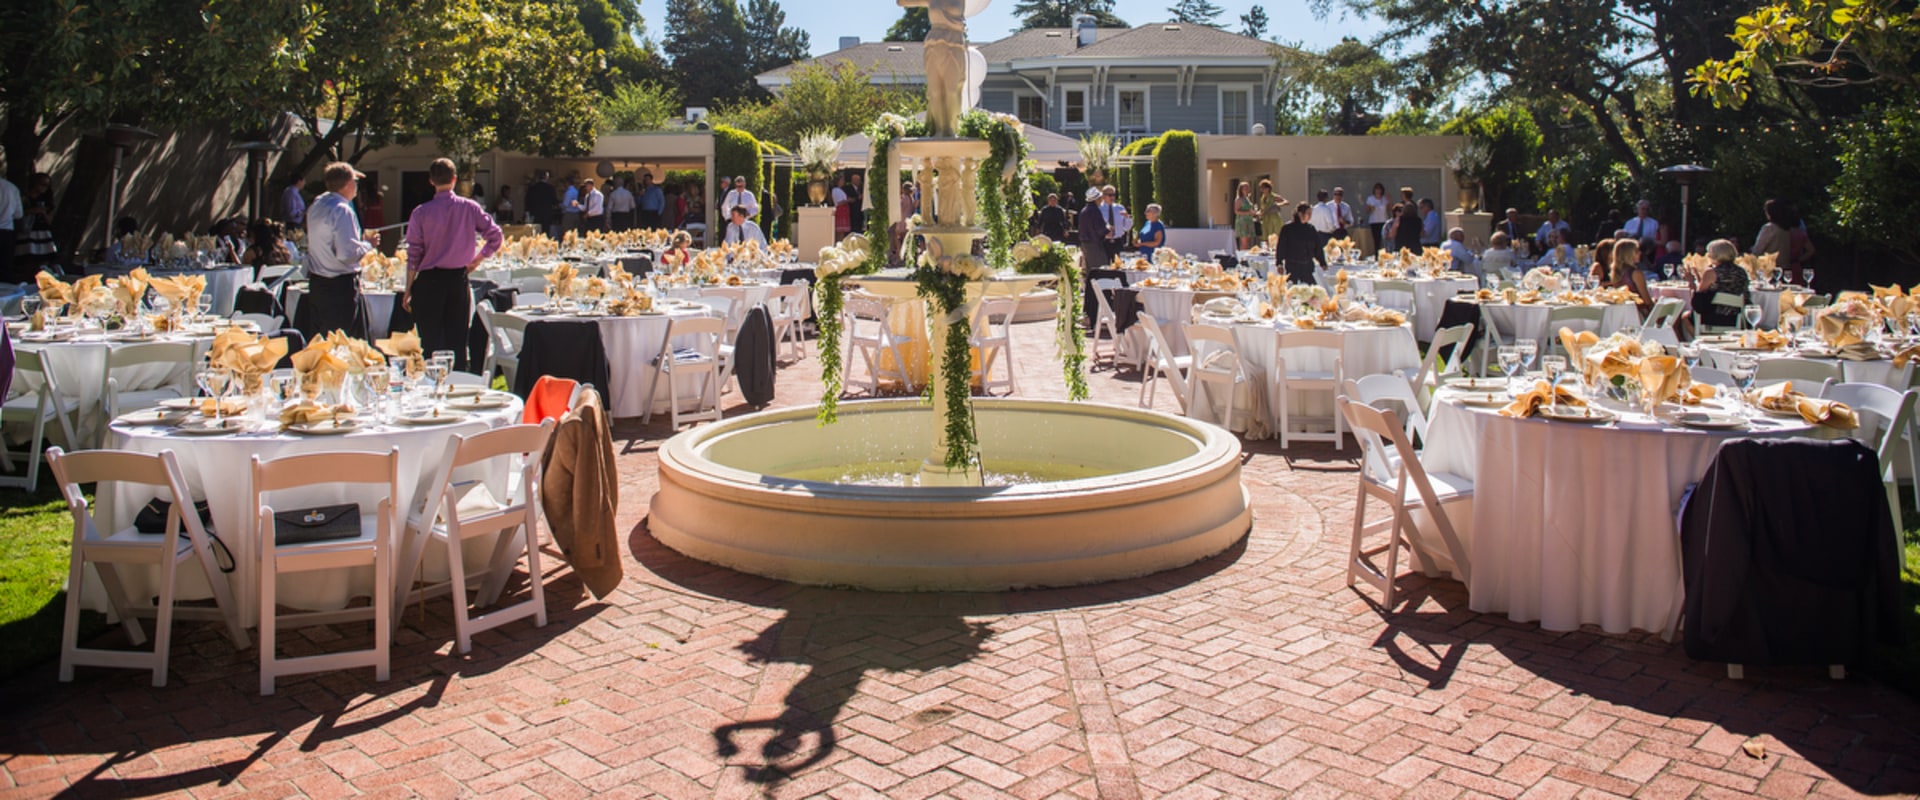 Where to Find the Perfect Outdoor Venue for Your Special Event in Clark County